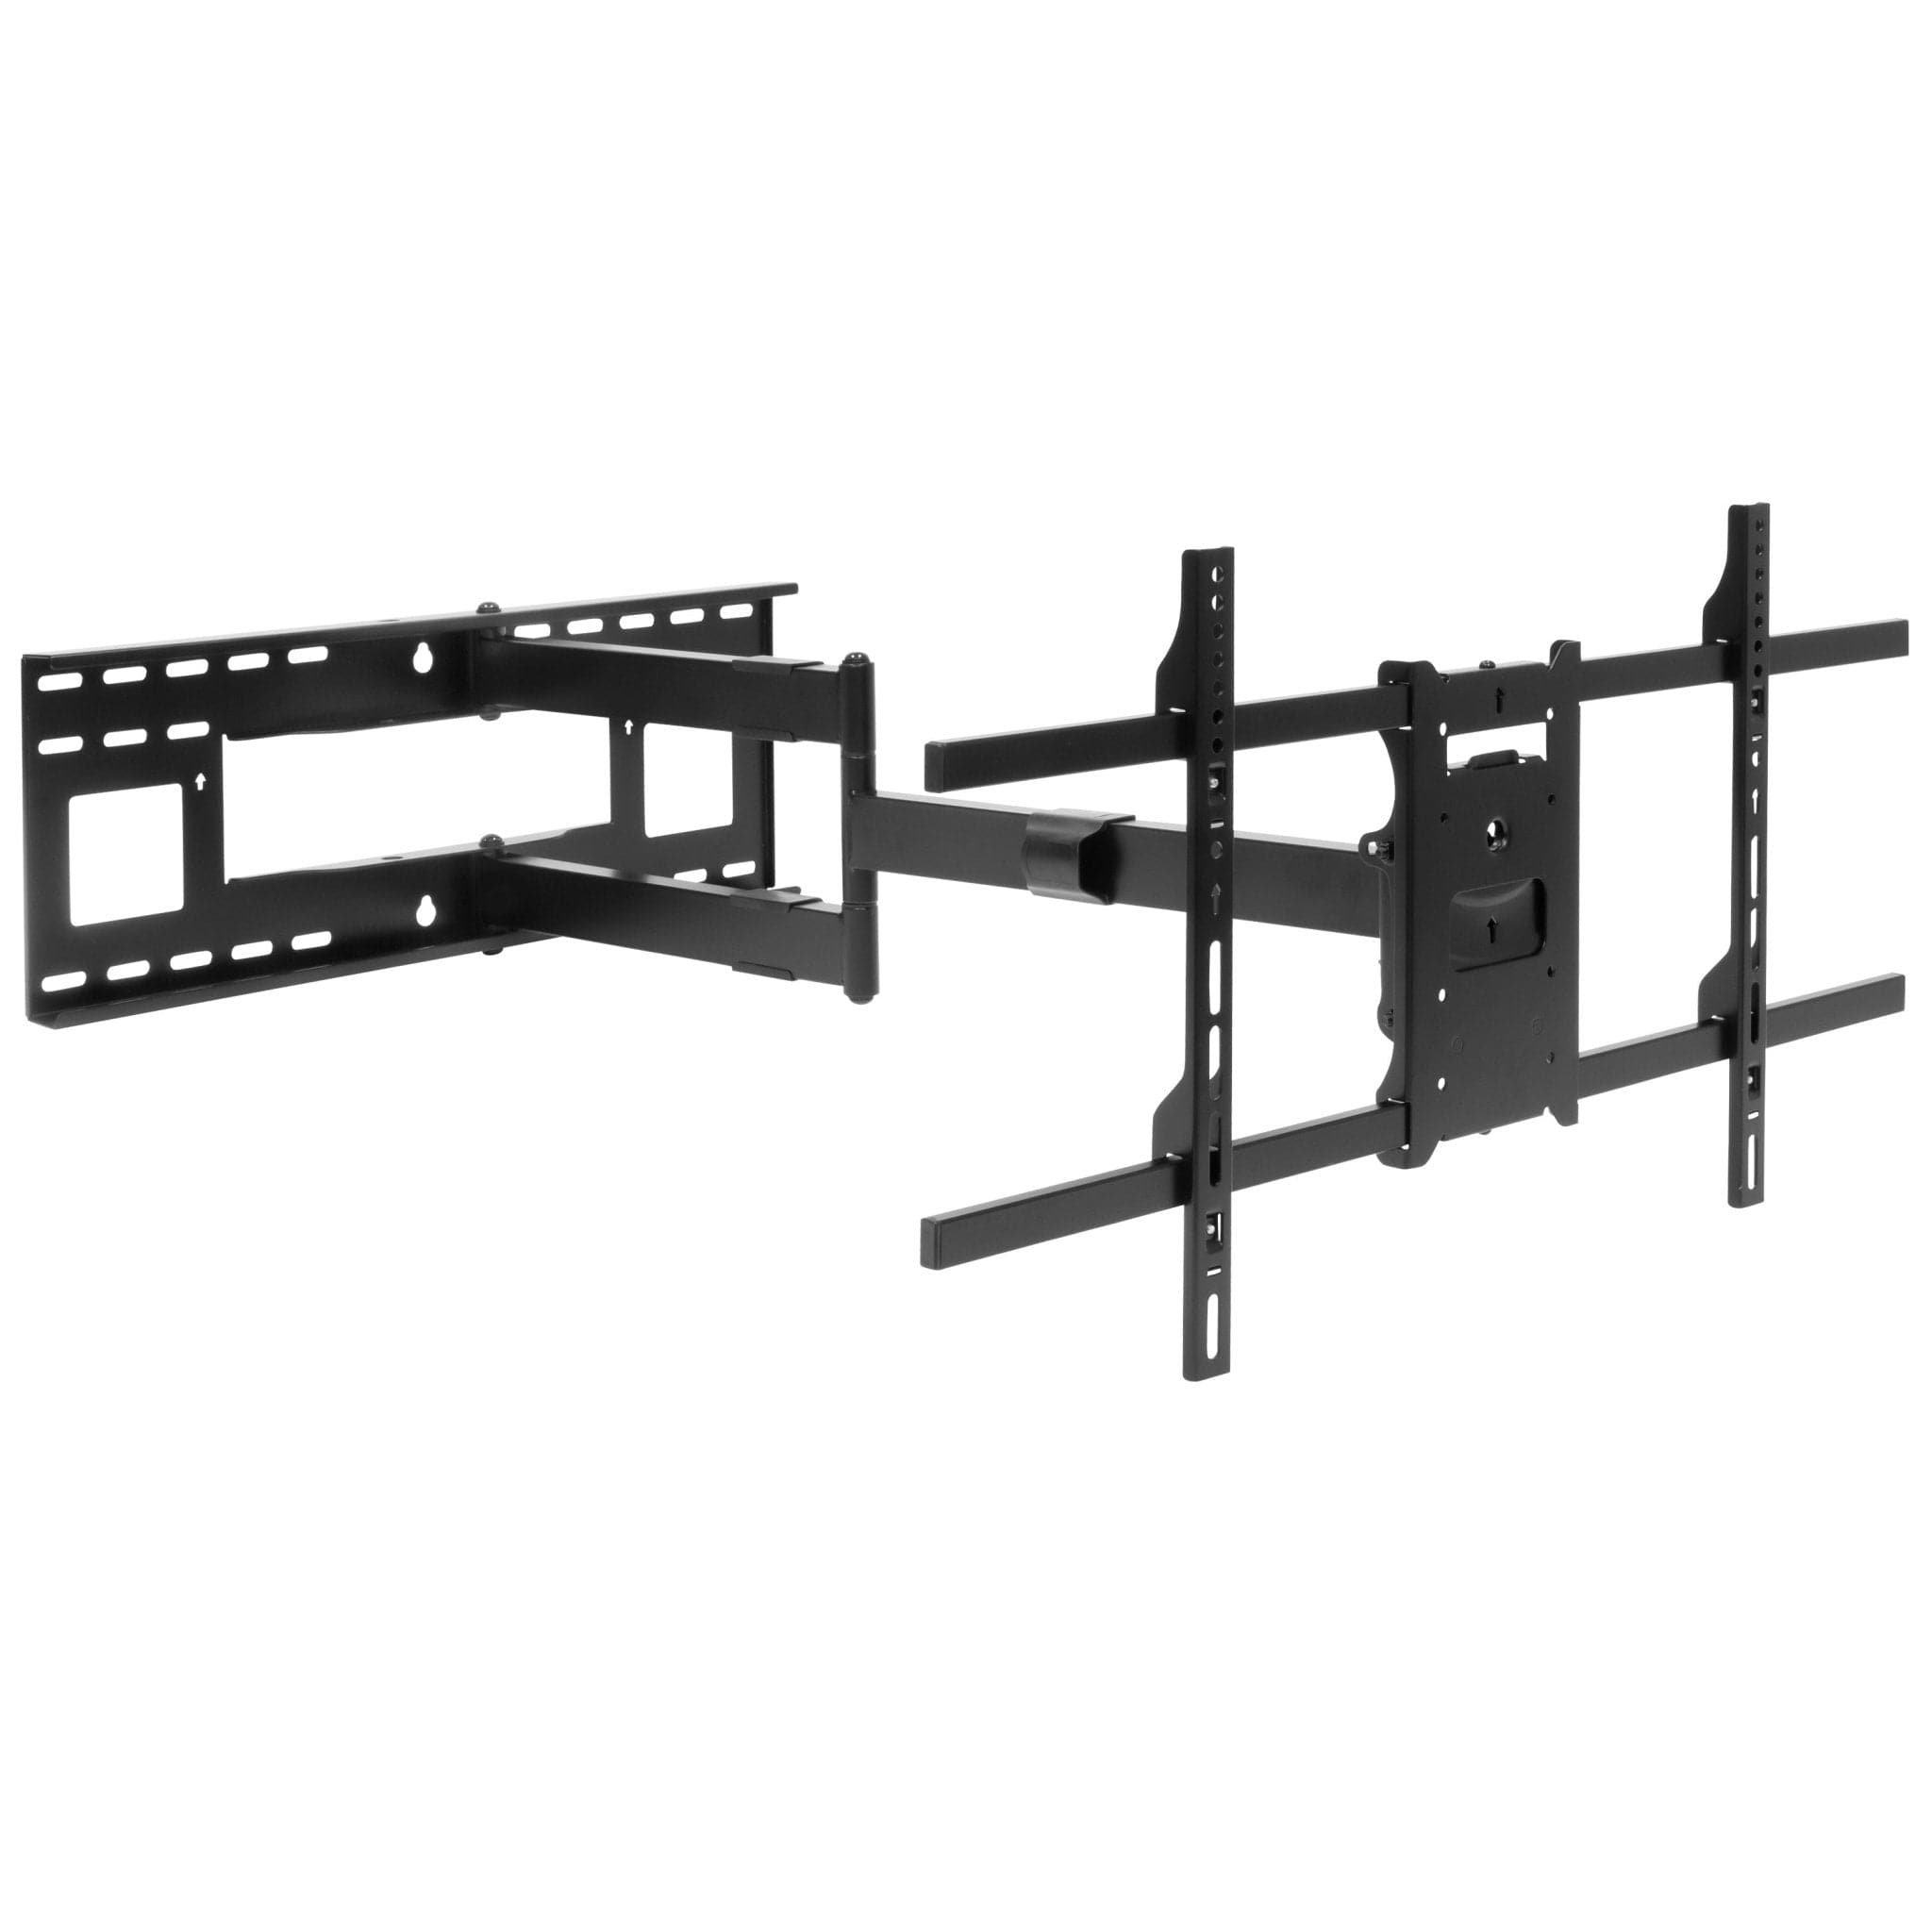 Full Motion TV Wall Mount with Extra Long Extension - Mount-It!